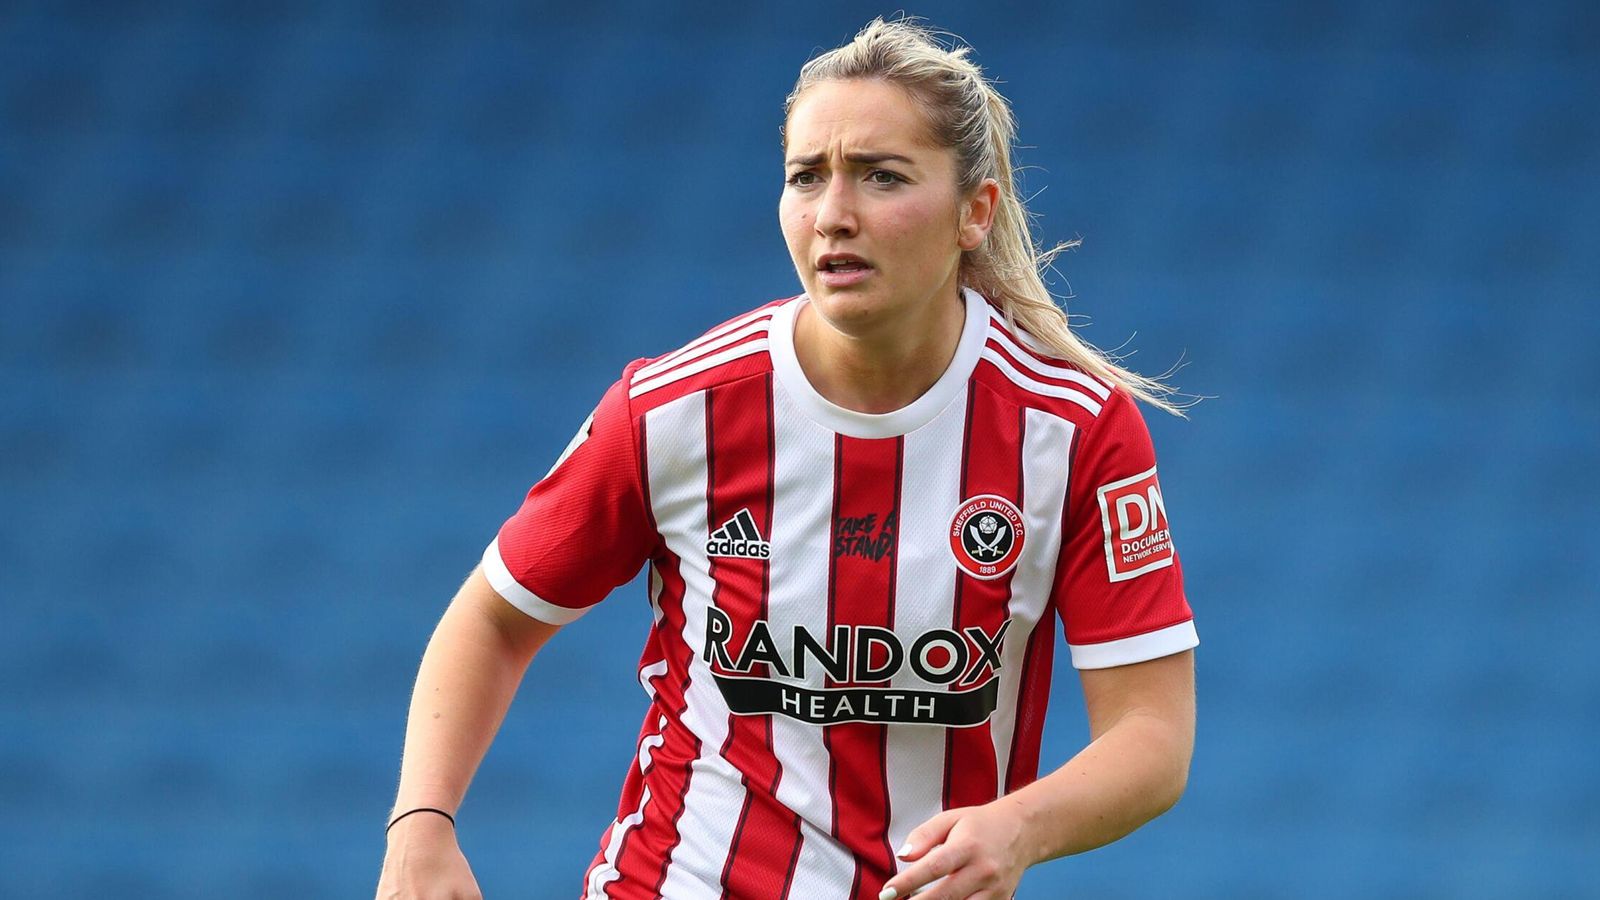 Maddy Cusack: Sheffield United 'devastated' by death of long-serving 27-year-old player